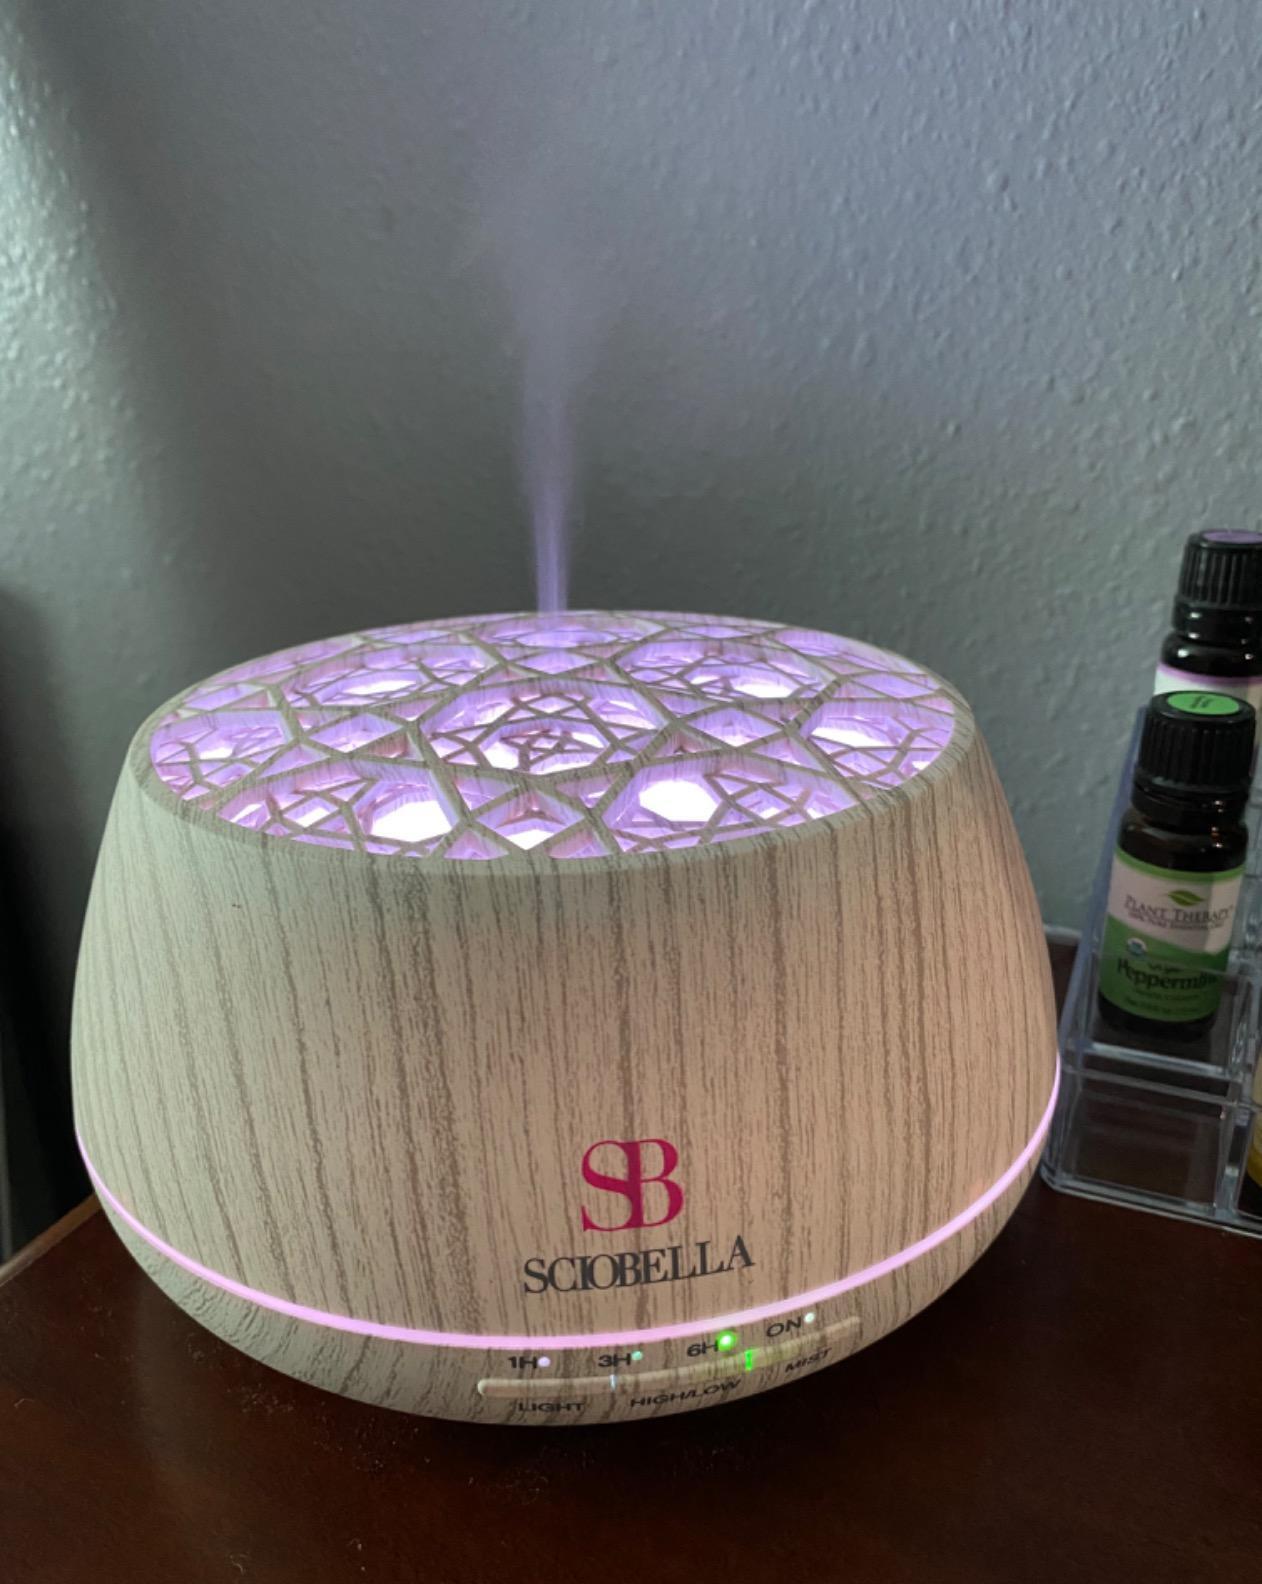 Essential Aroma Oil Diffuser for Large Room Ultrasonic Aromatherapy 400 ml